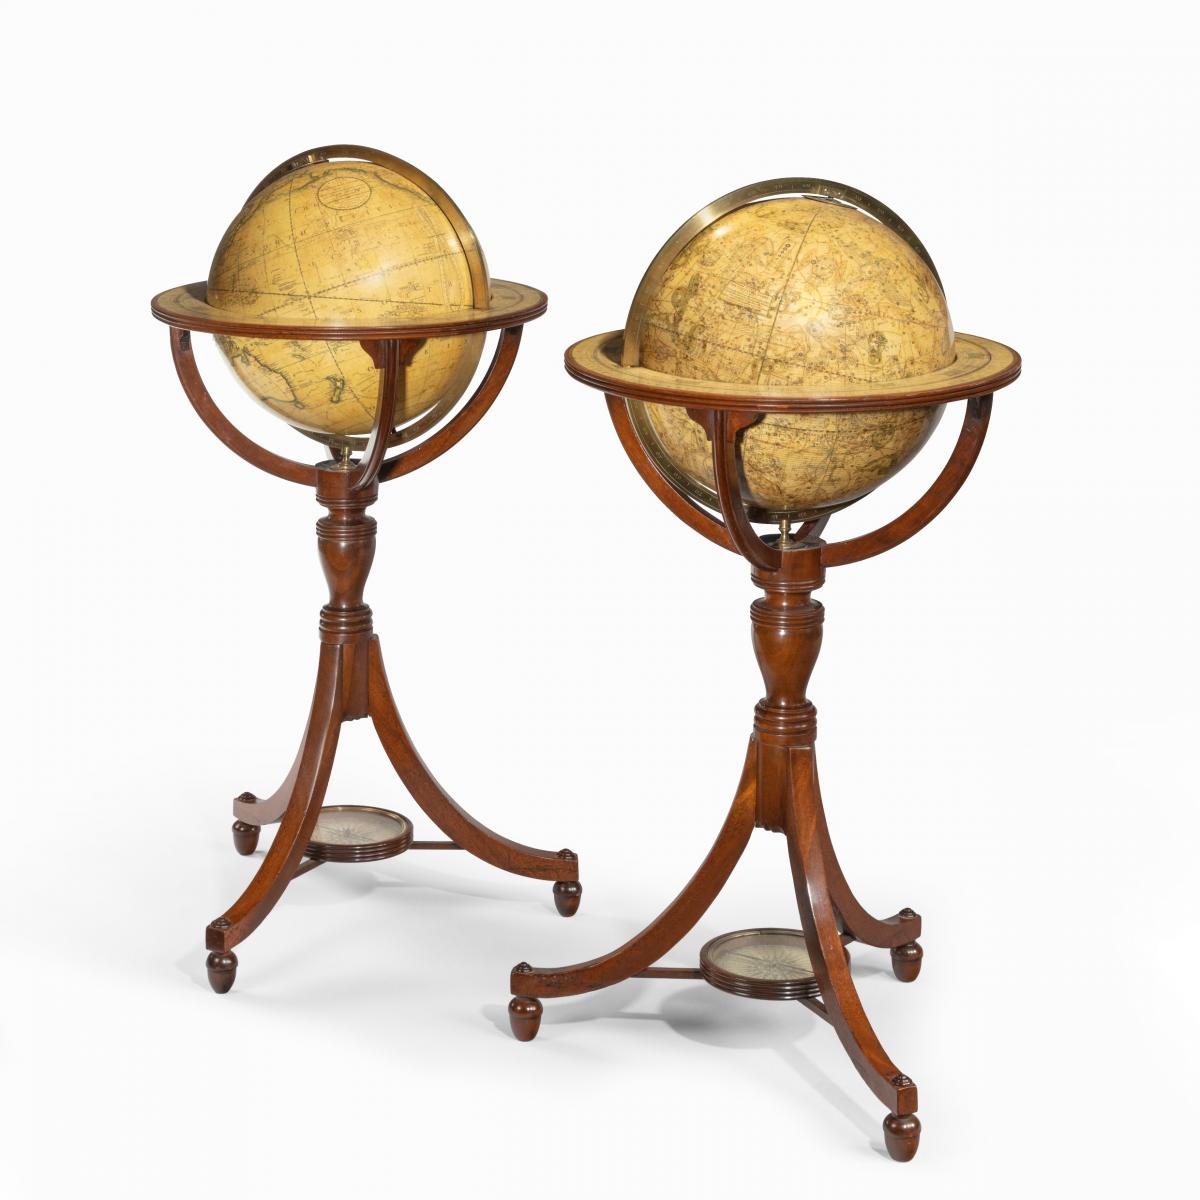 A pair of 12-inch floor globes by Cary